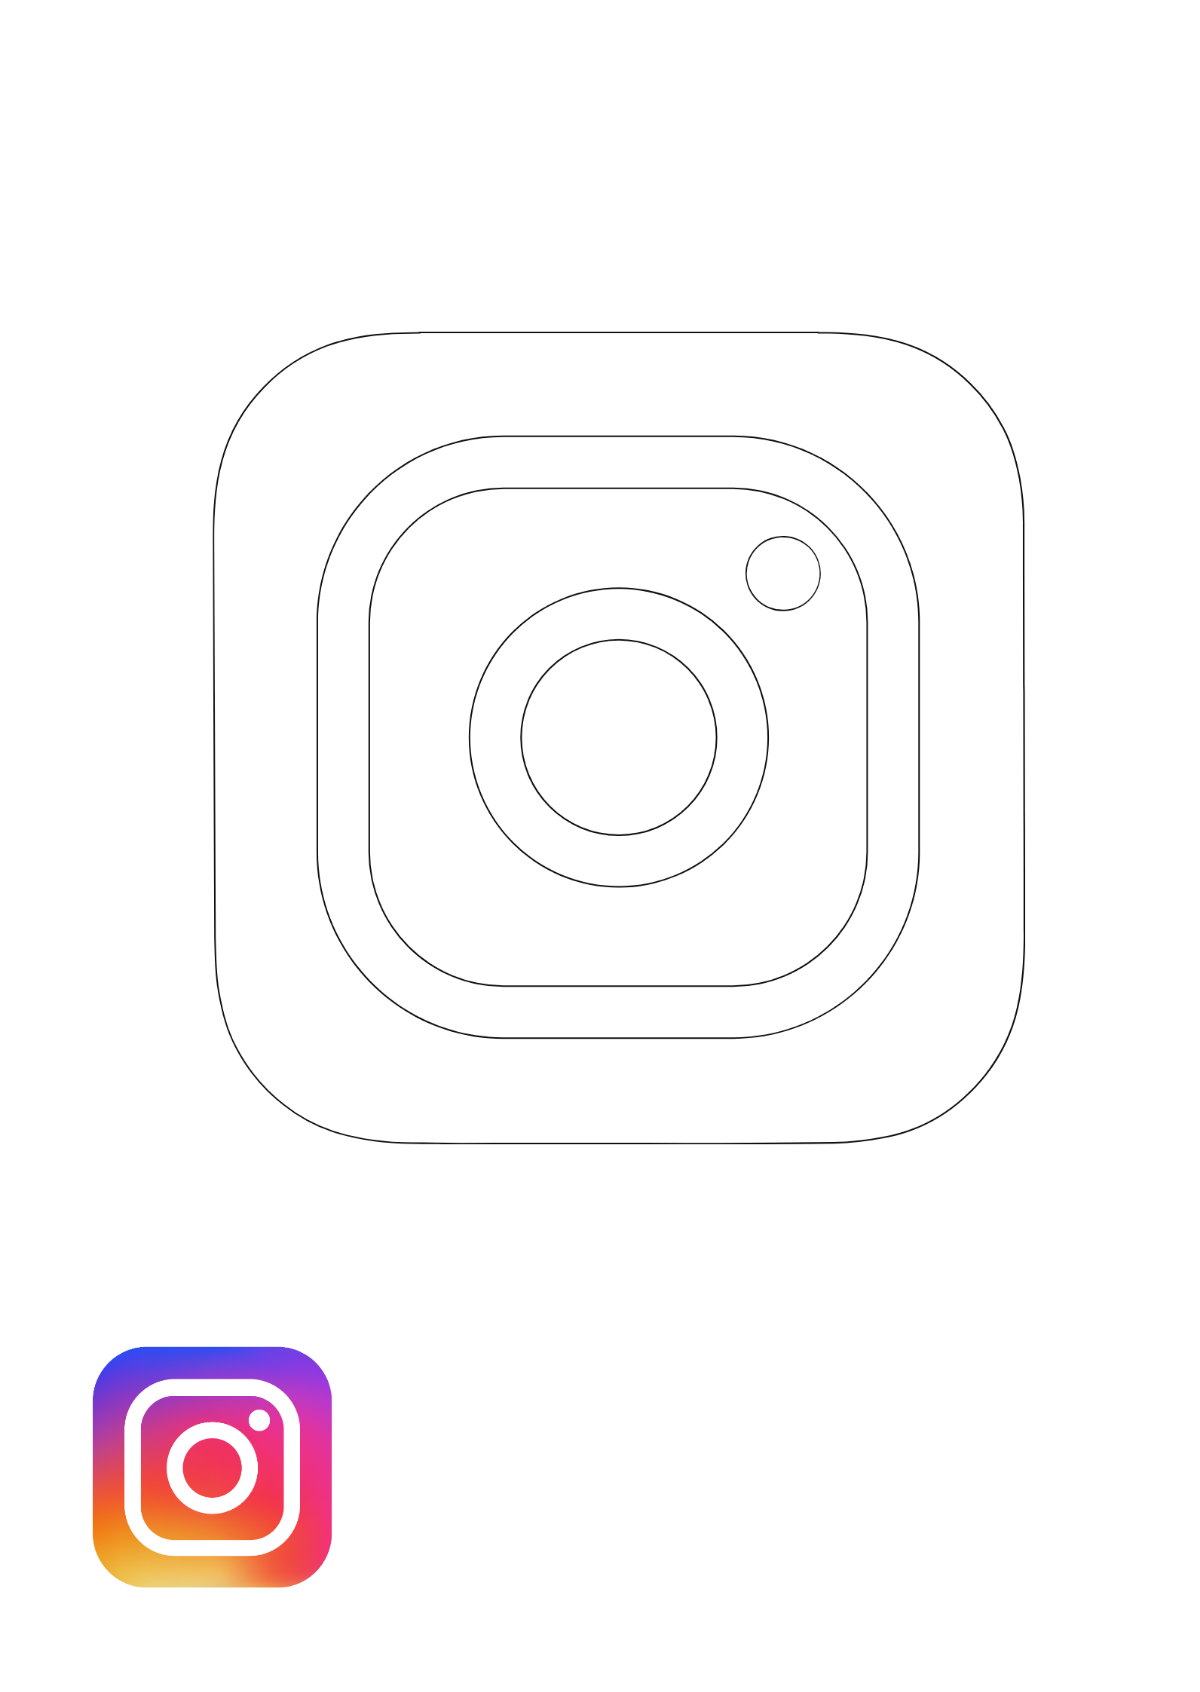 Instagram Colour Logo Coloring Page Template